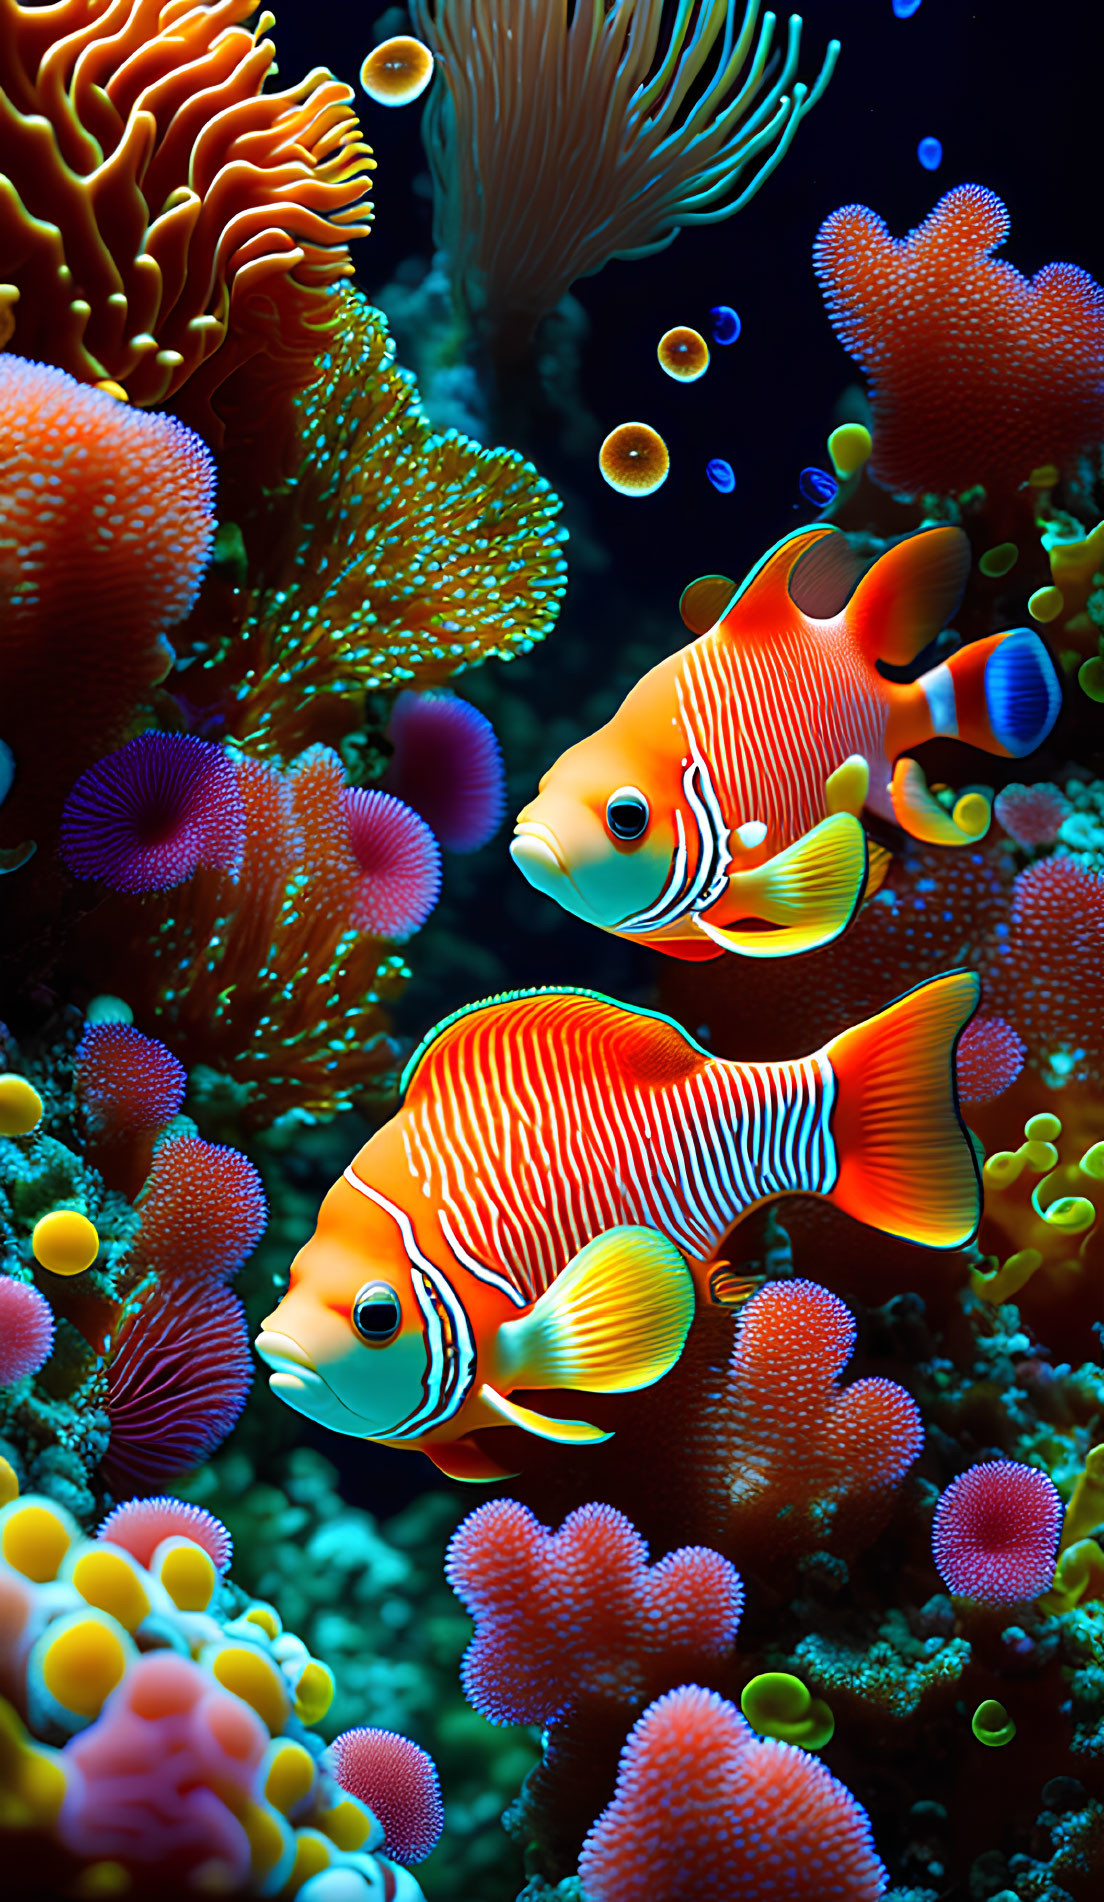 Colorful Clownfish Swimming in Vibrant Coral Reef Environment